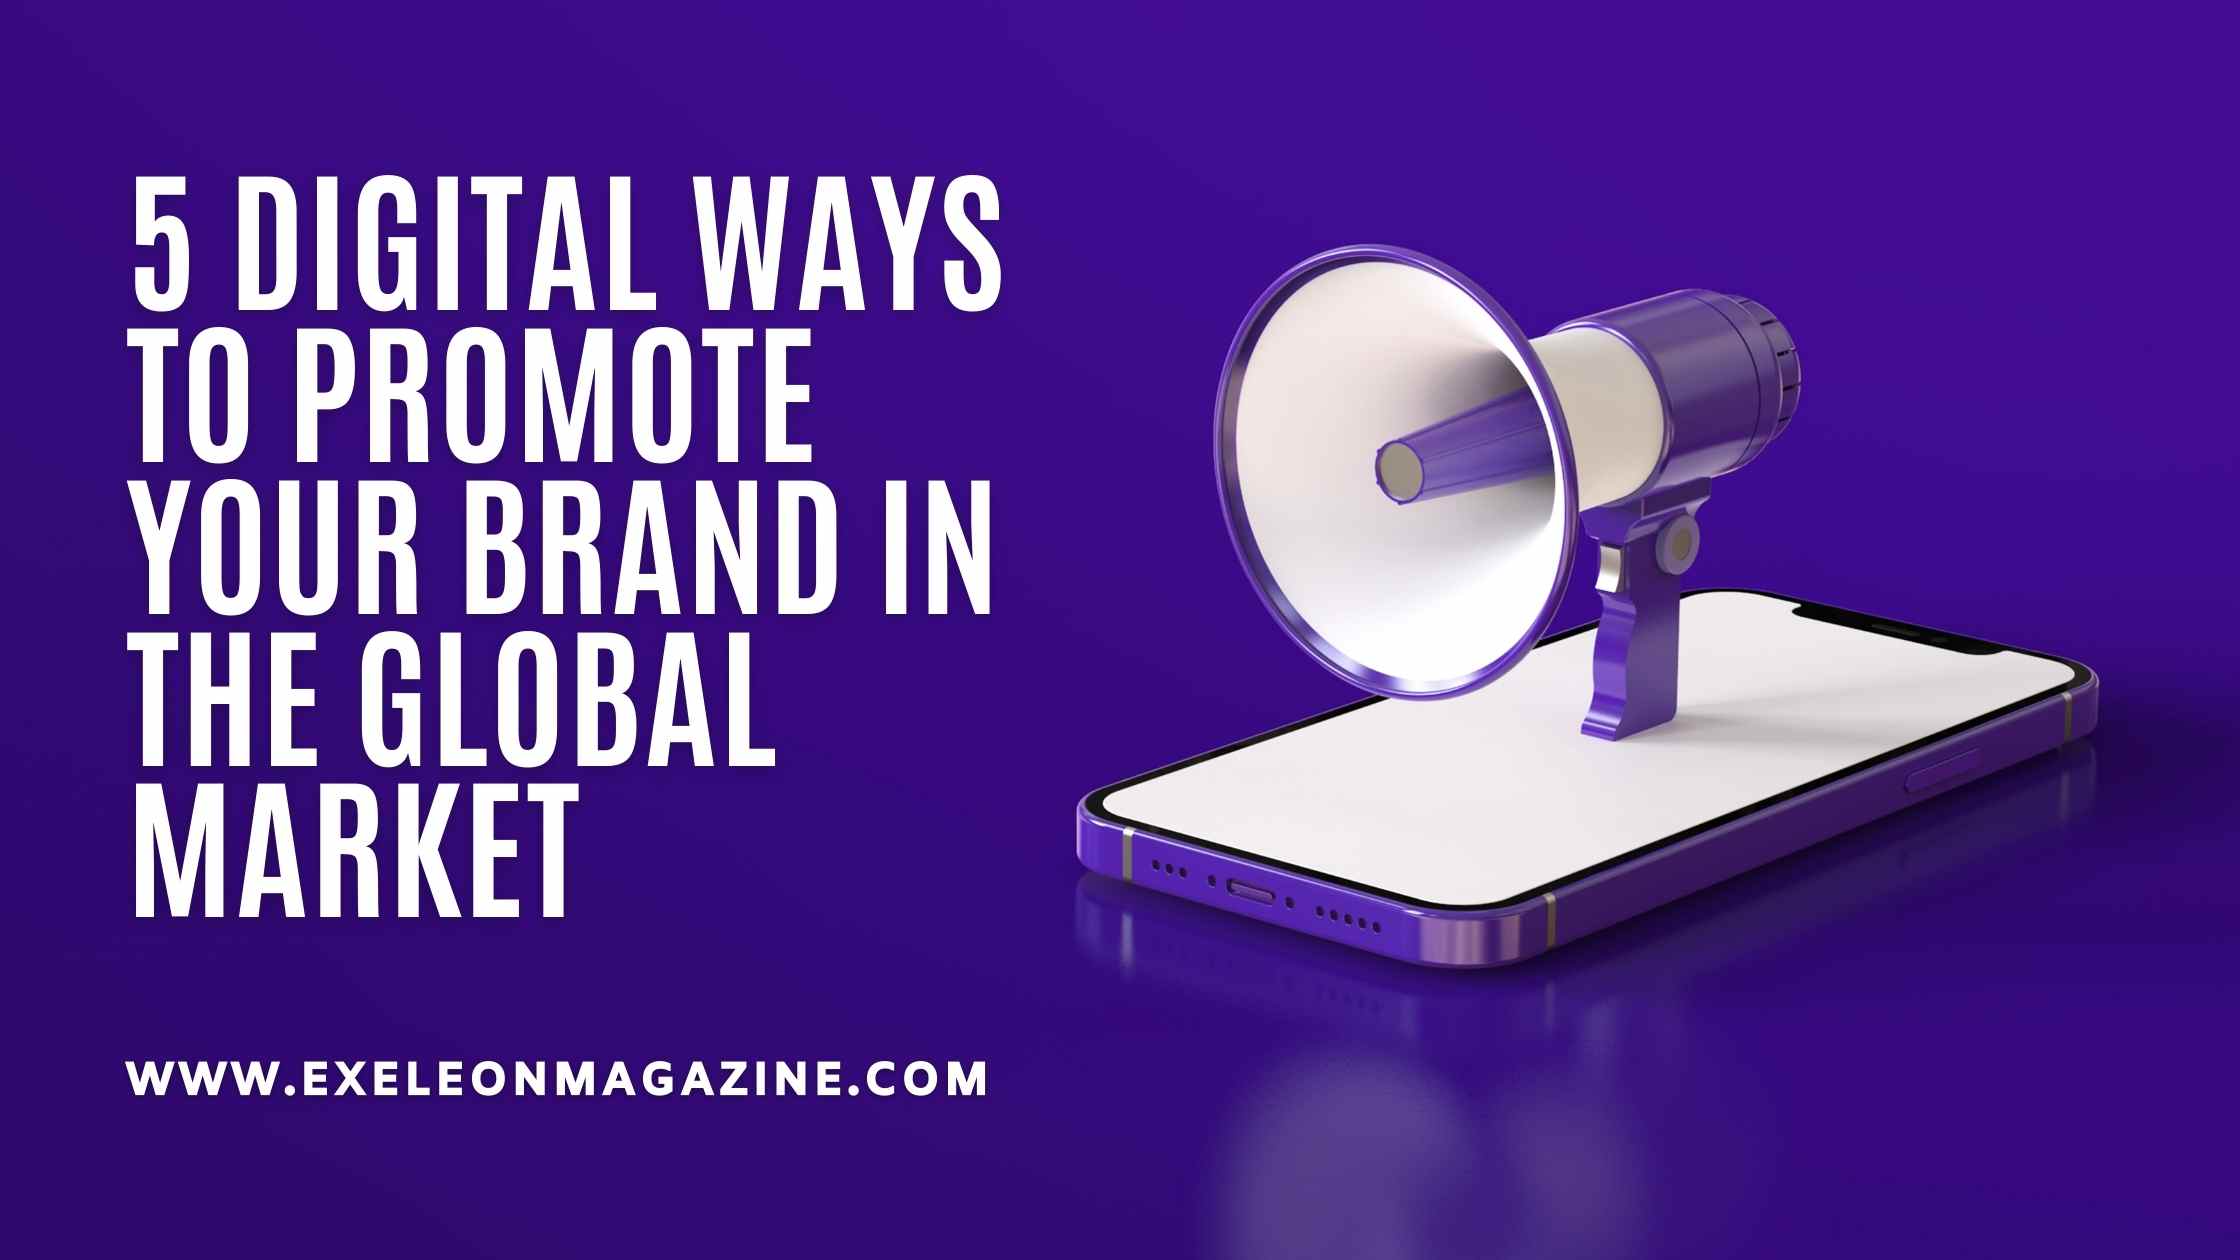 5 Digital Ways To Promote Your Brand In The Global Market